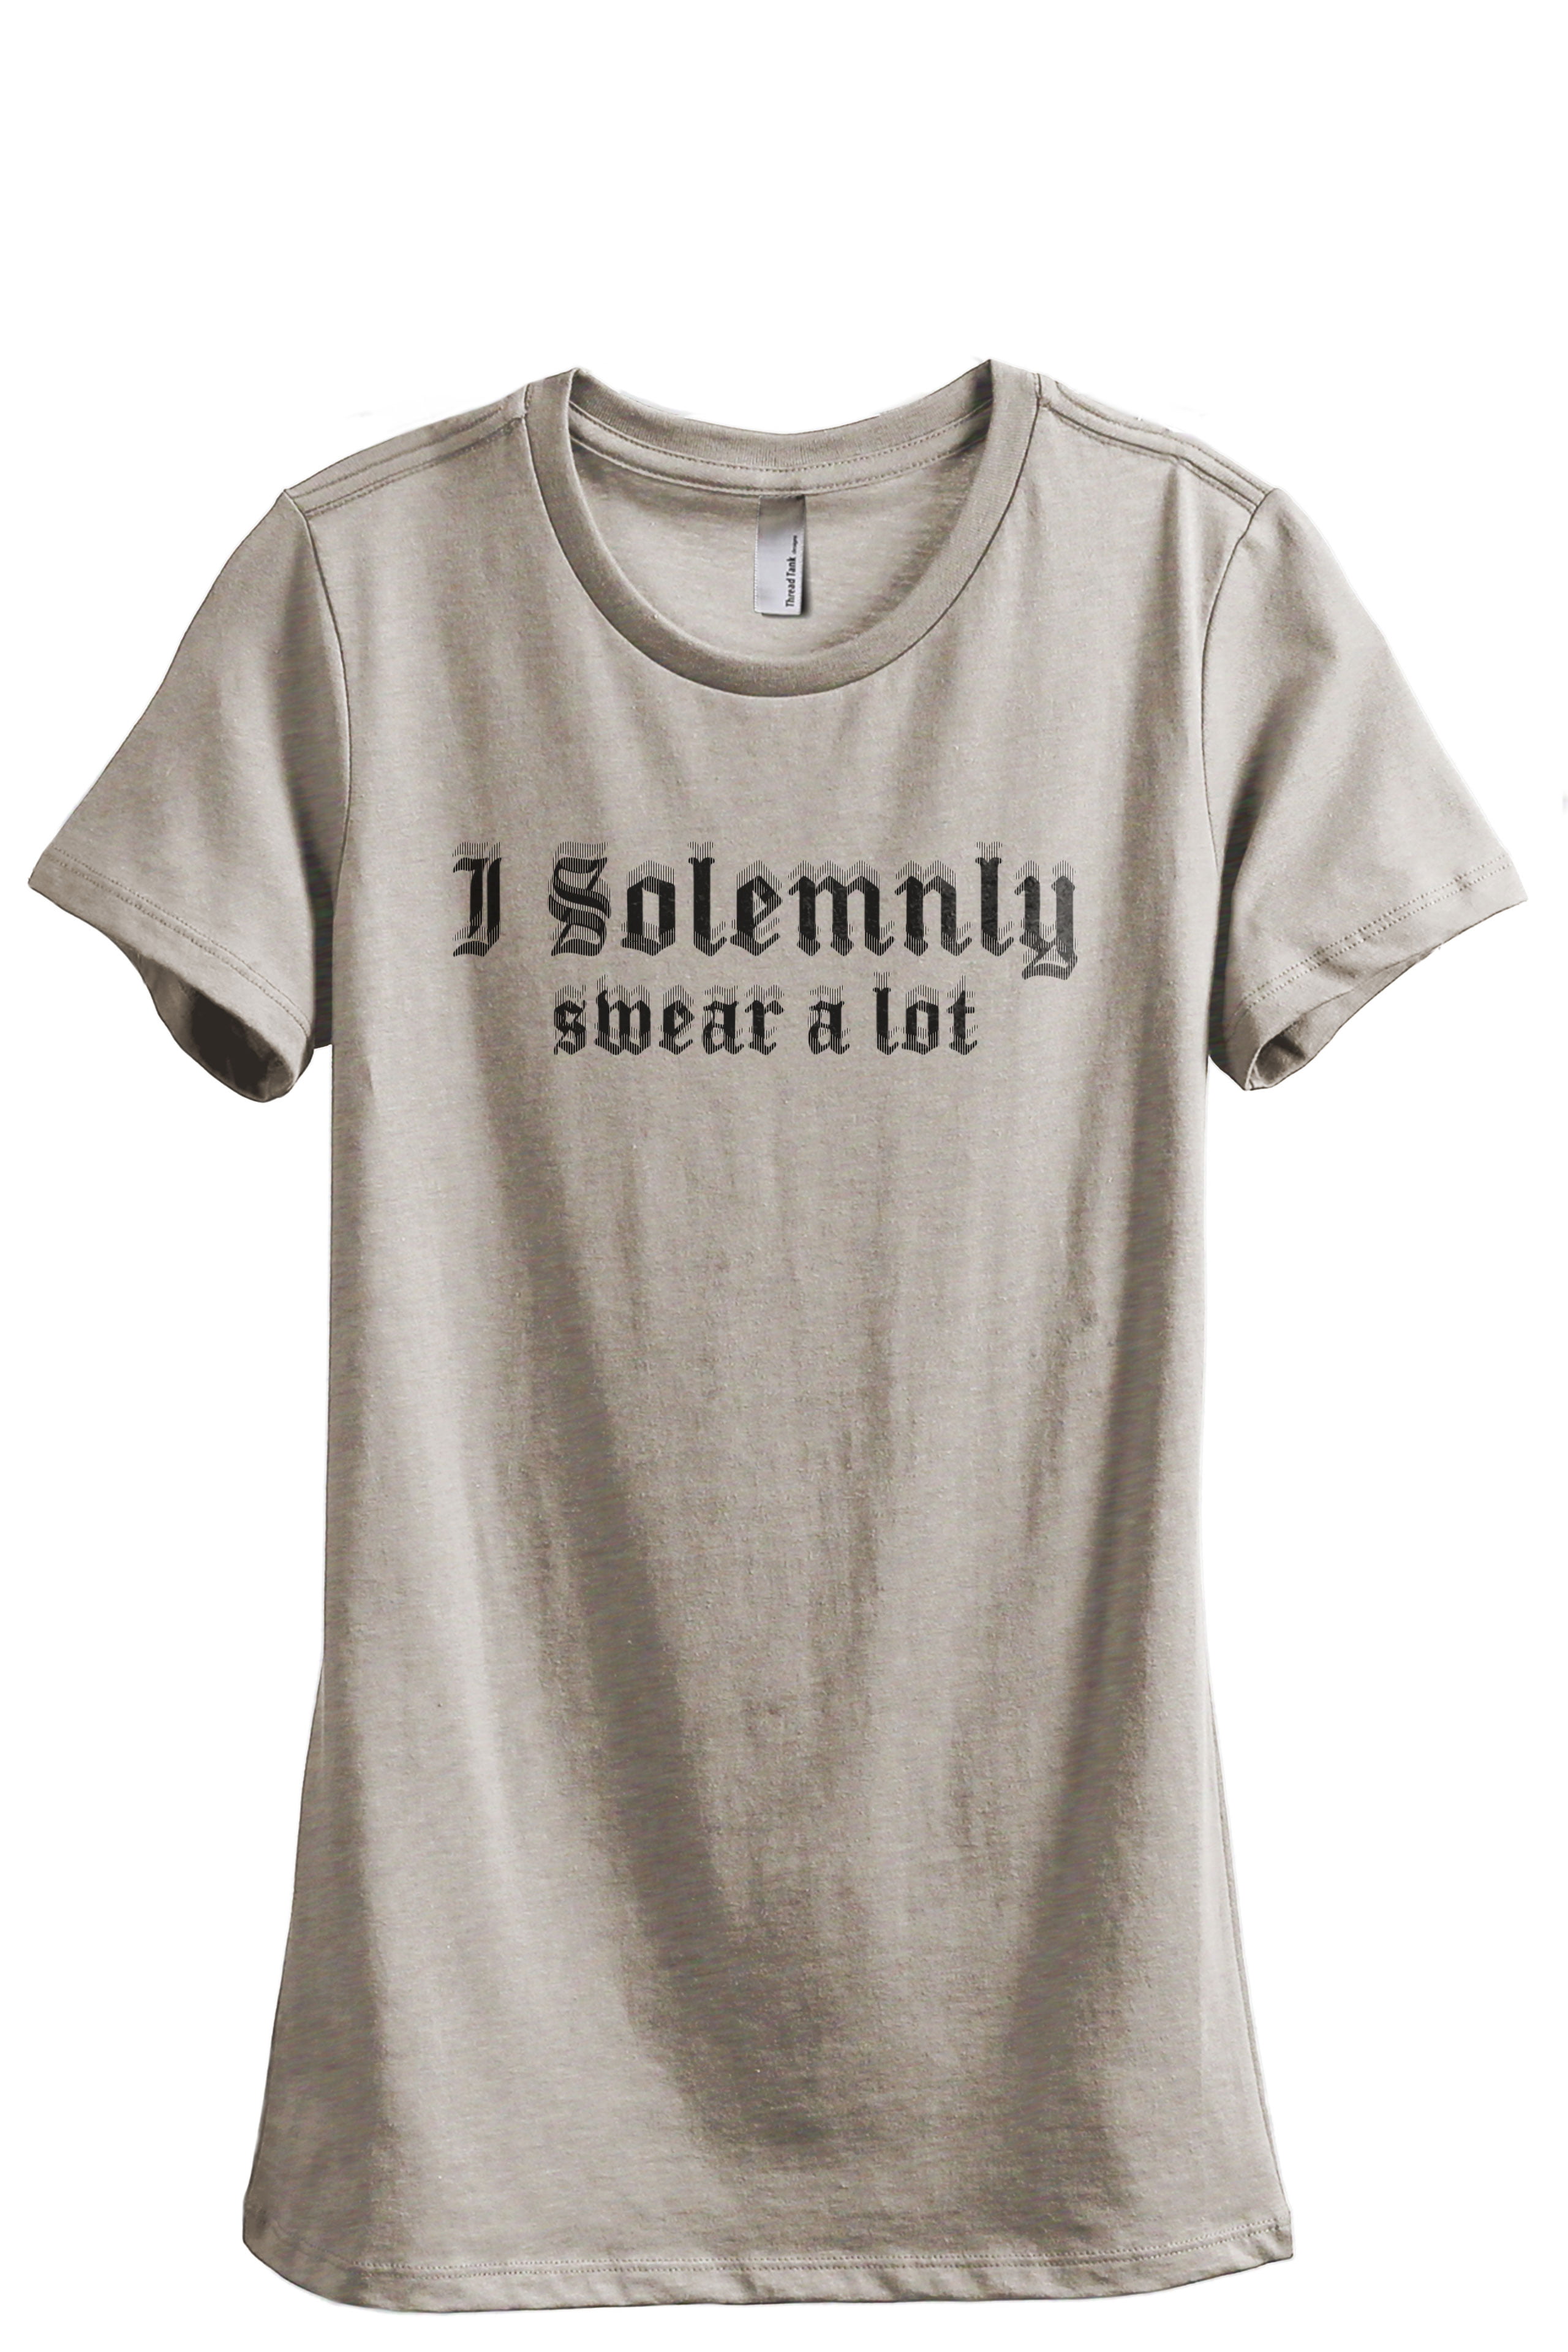 I Solemnly Swear A Lot Women's Fashion Relaxed T-Shirt Tee Heather